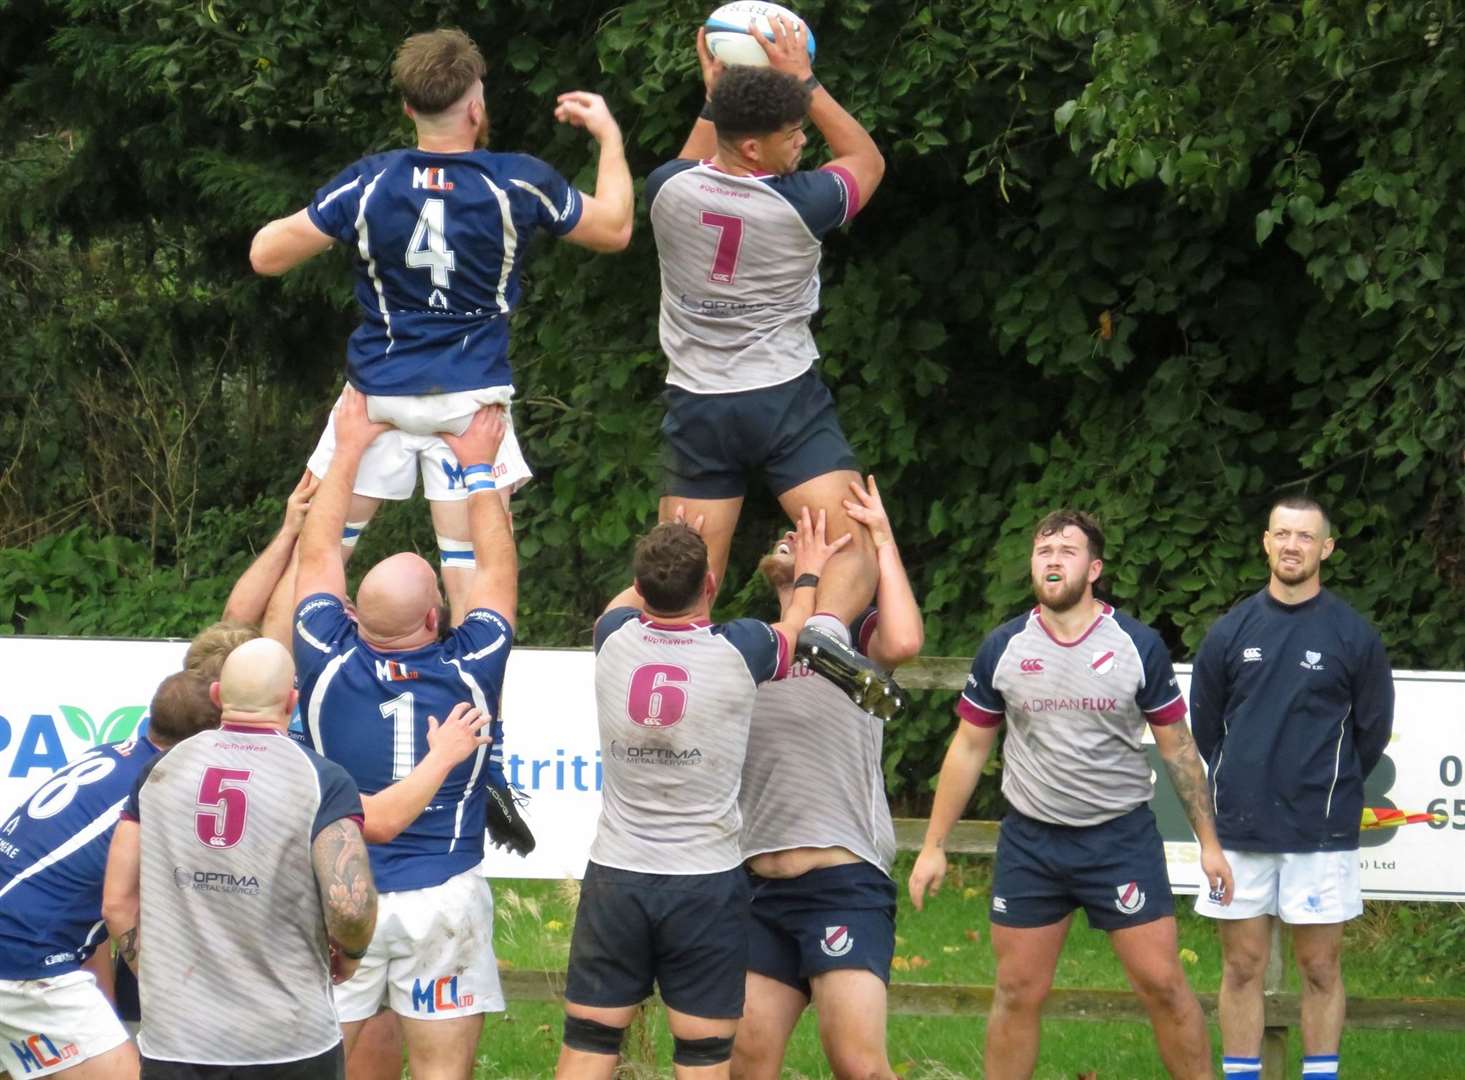 Lewis Stewart catching at the lineout